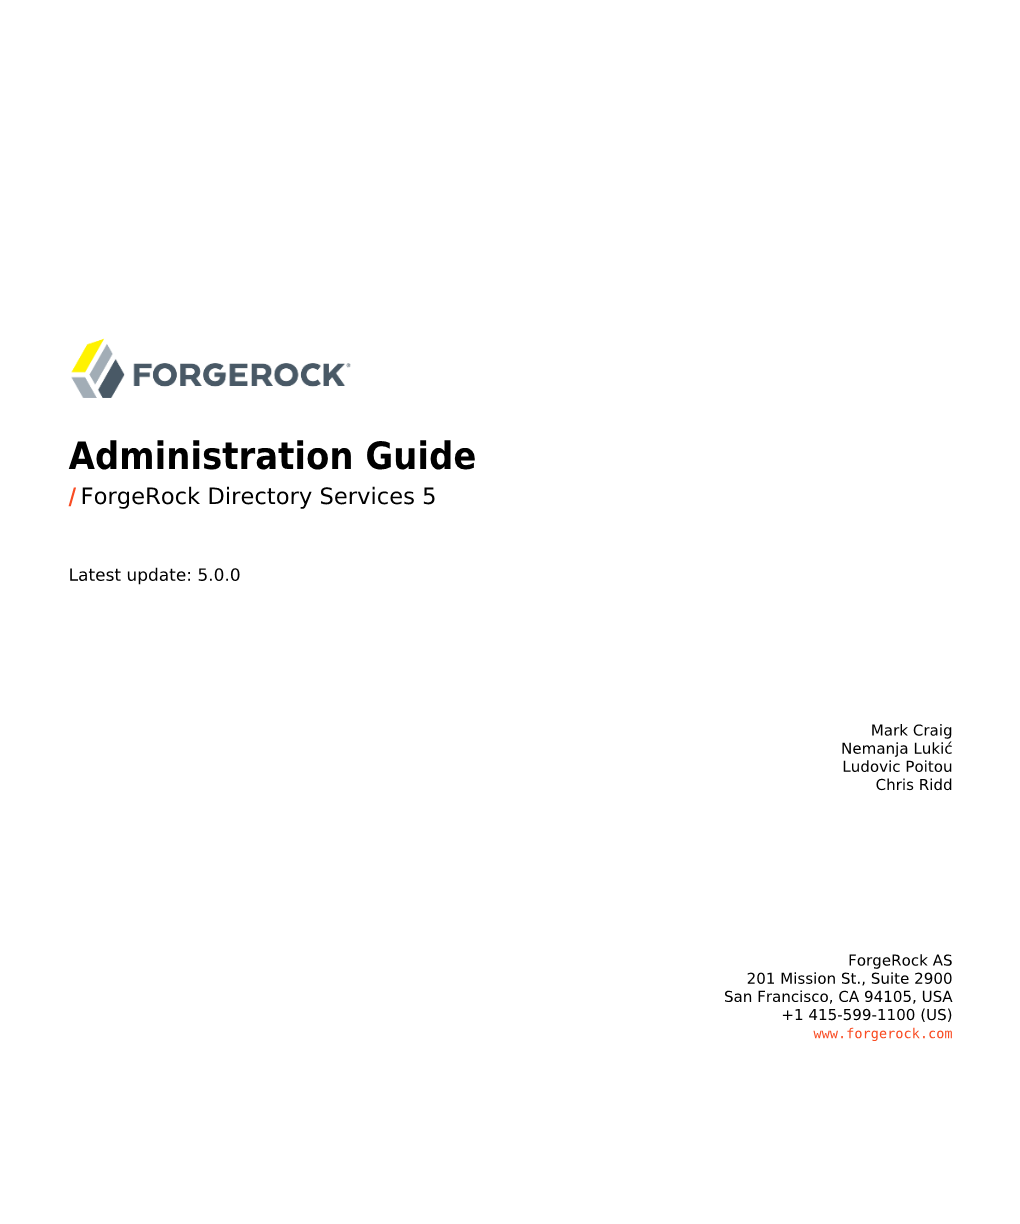 Administration Guide / Forgerock Directory Services 5